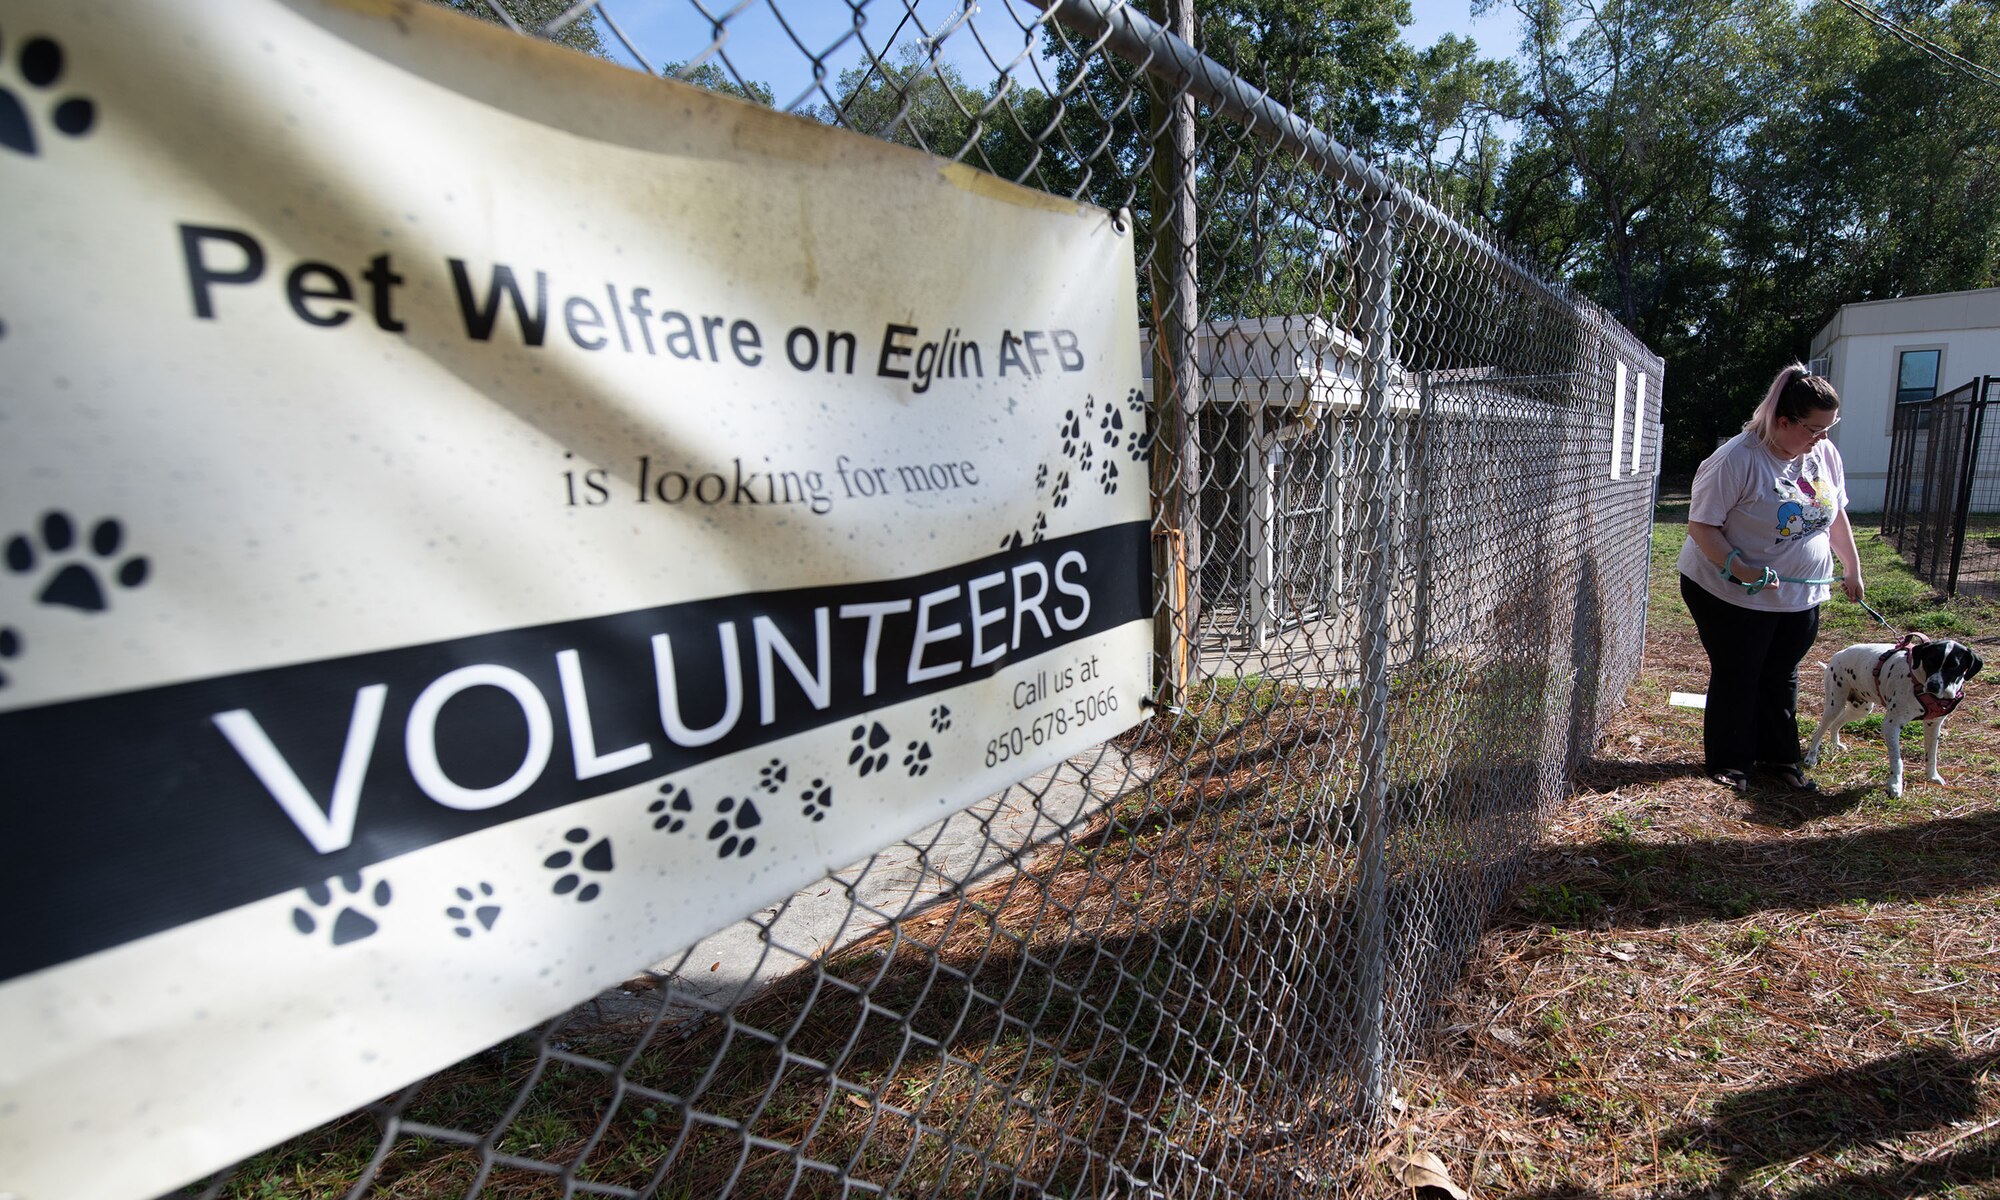 A sign reads, "Pet Welfare on Eglin AFB is looking for more volunteers." In the background is a volunteer walking a dog next to the fence with the sign.